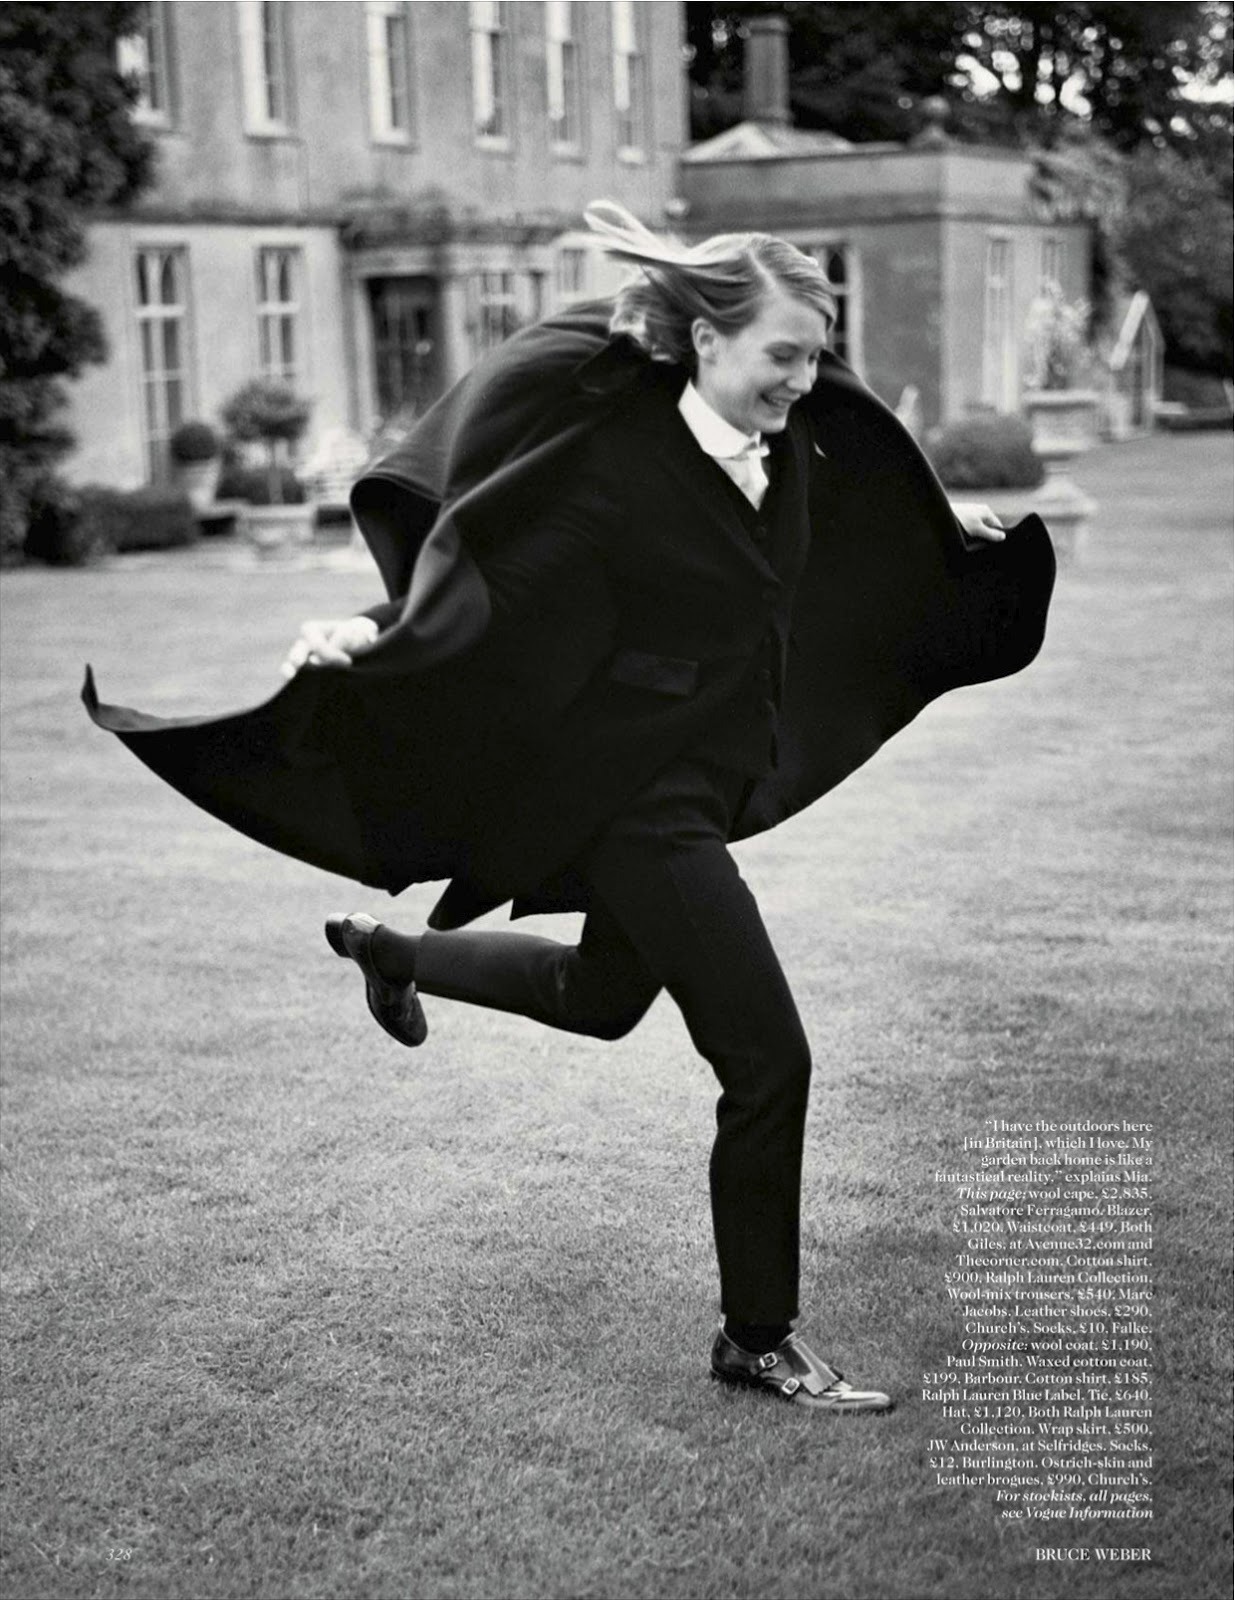 vogueweekend:
“ “If I Take Your Picture Mia, Will You Take Mine?”, Mia Wasikowska photographed by Bruce Weber in British Vogue September 2012
”